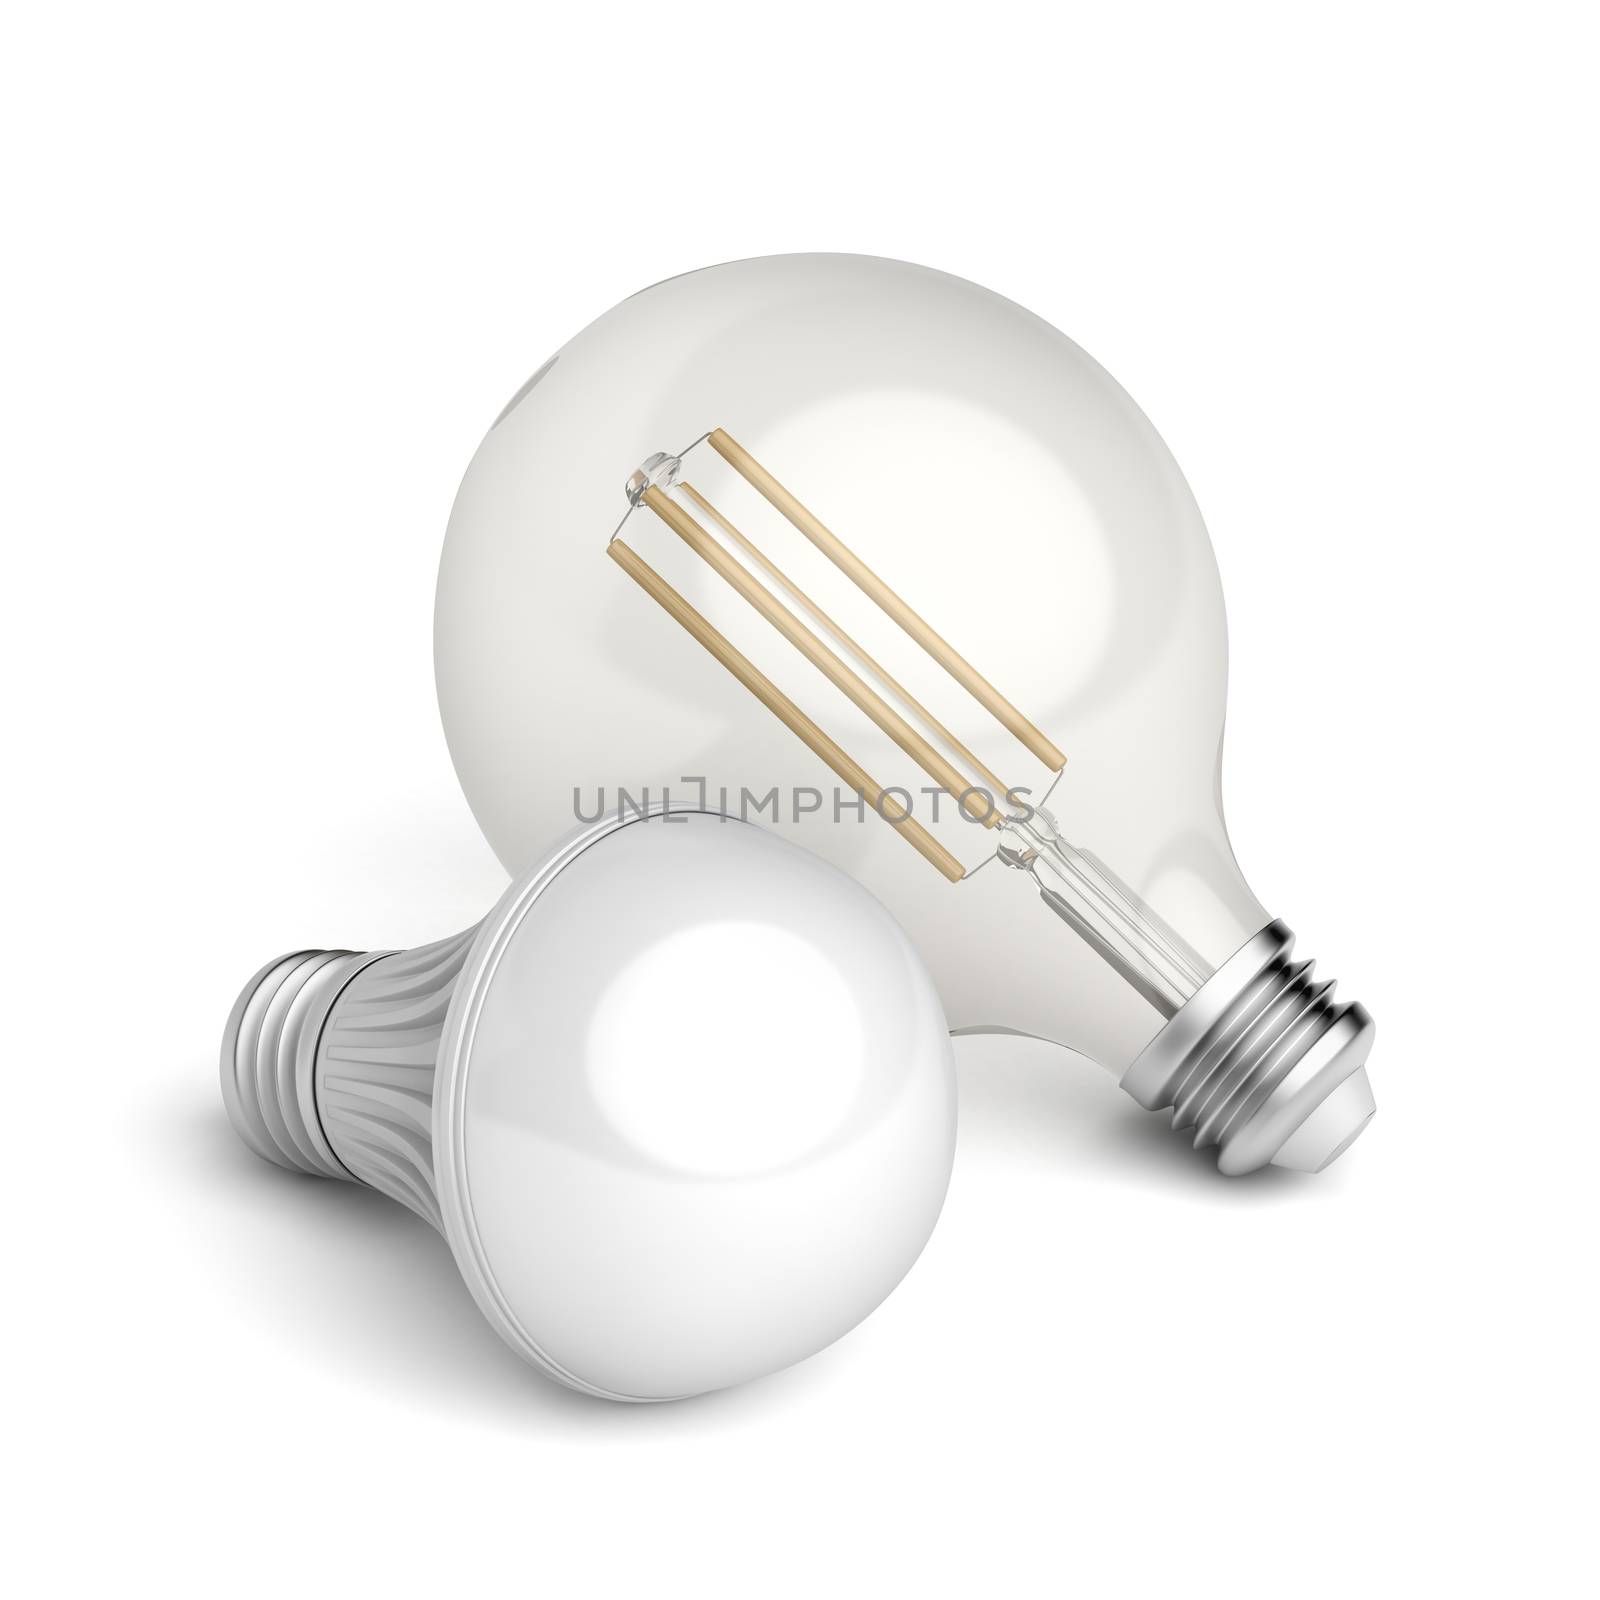 Different LED light bulbs by magraphics